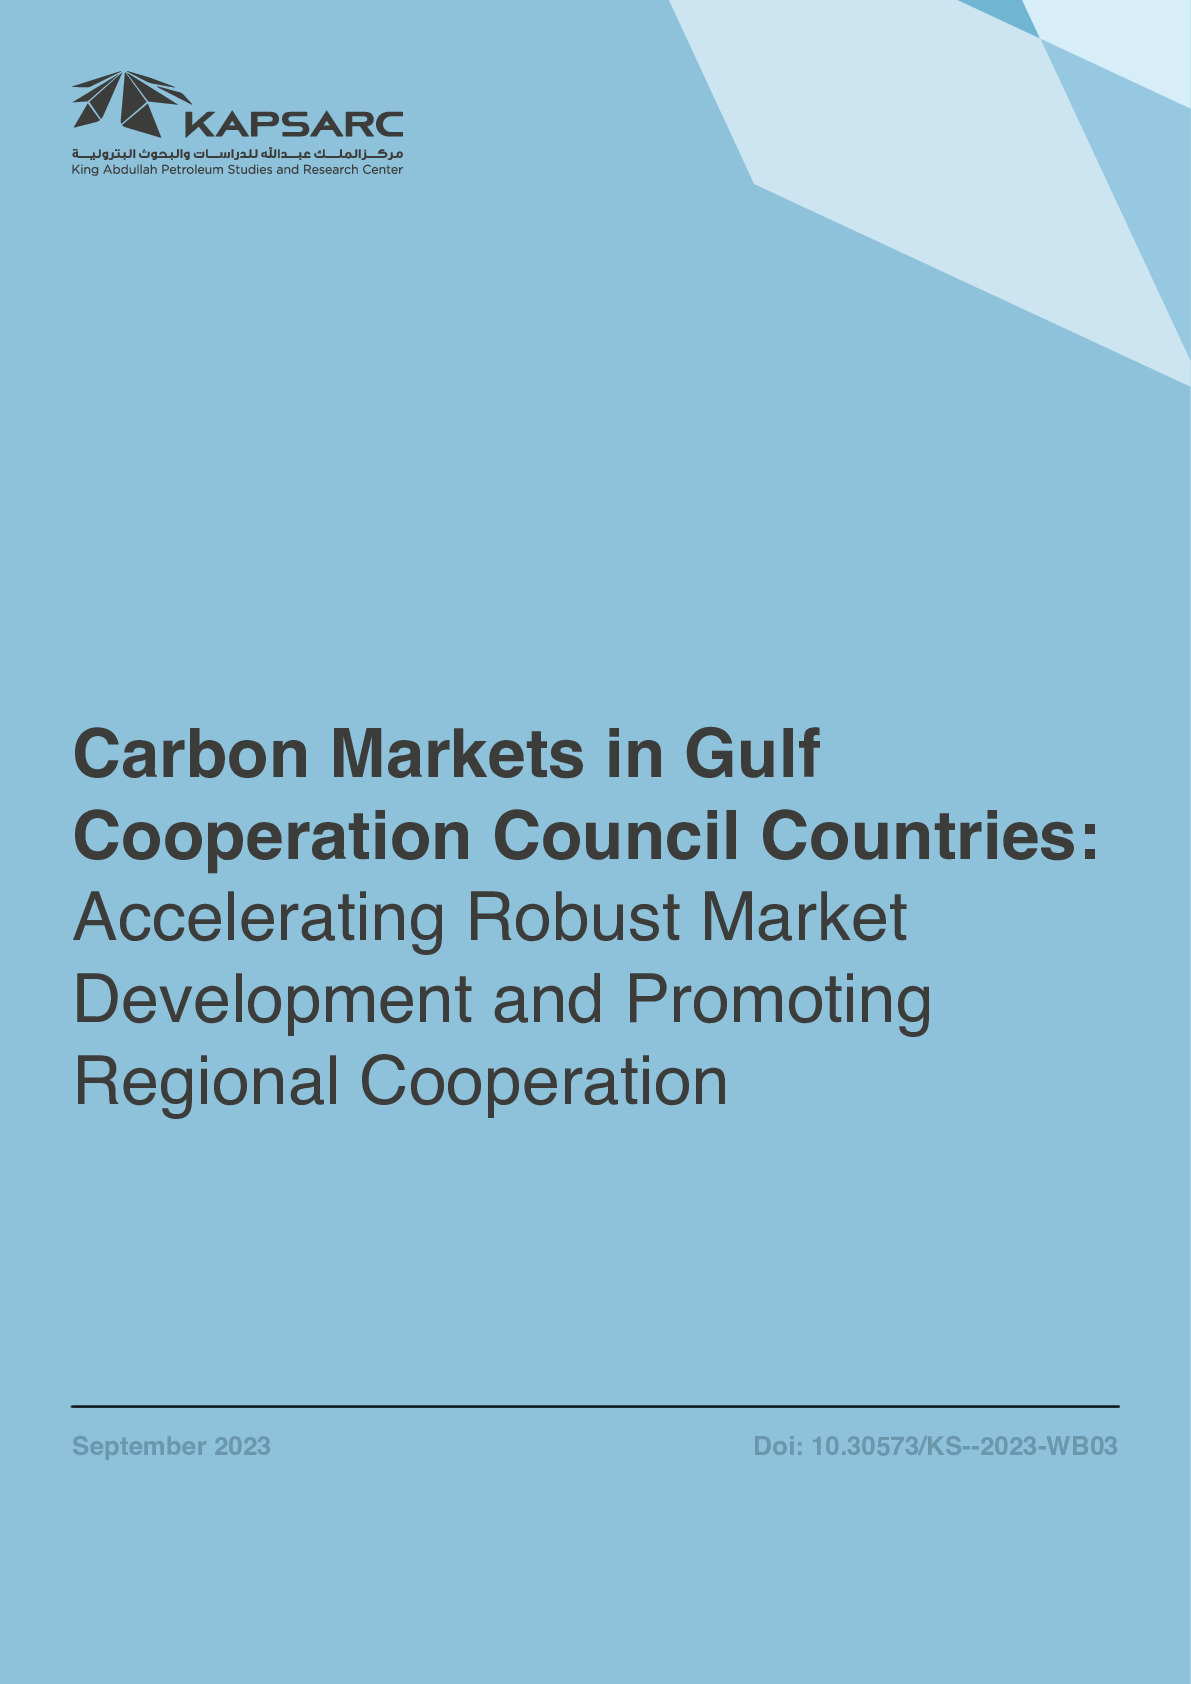 Carbon Markets in Gulf Cooperation Council Countries: Accelerating Robust Market Development and Promoting Regional Cooperation